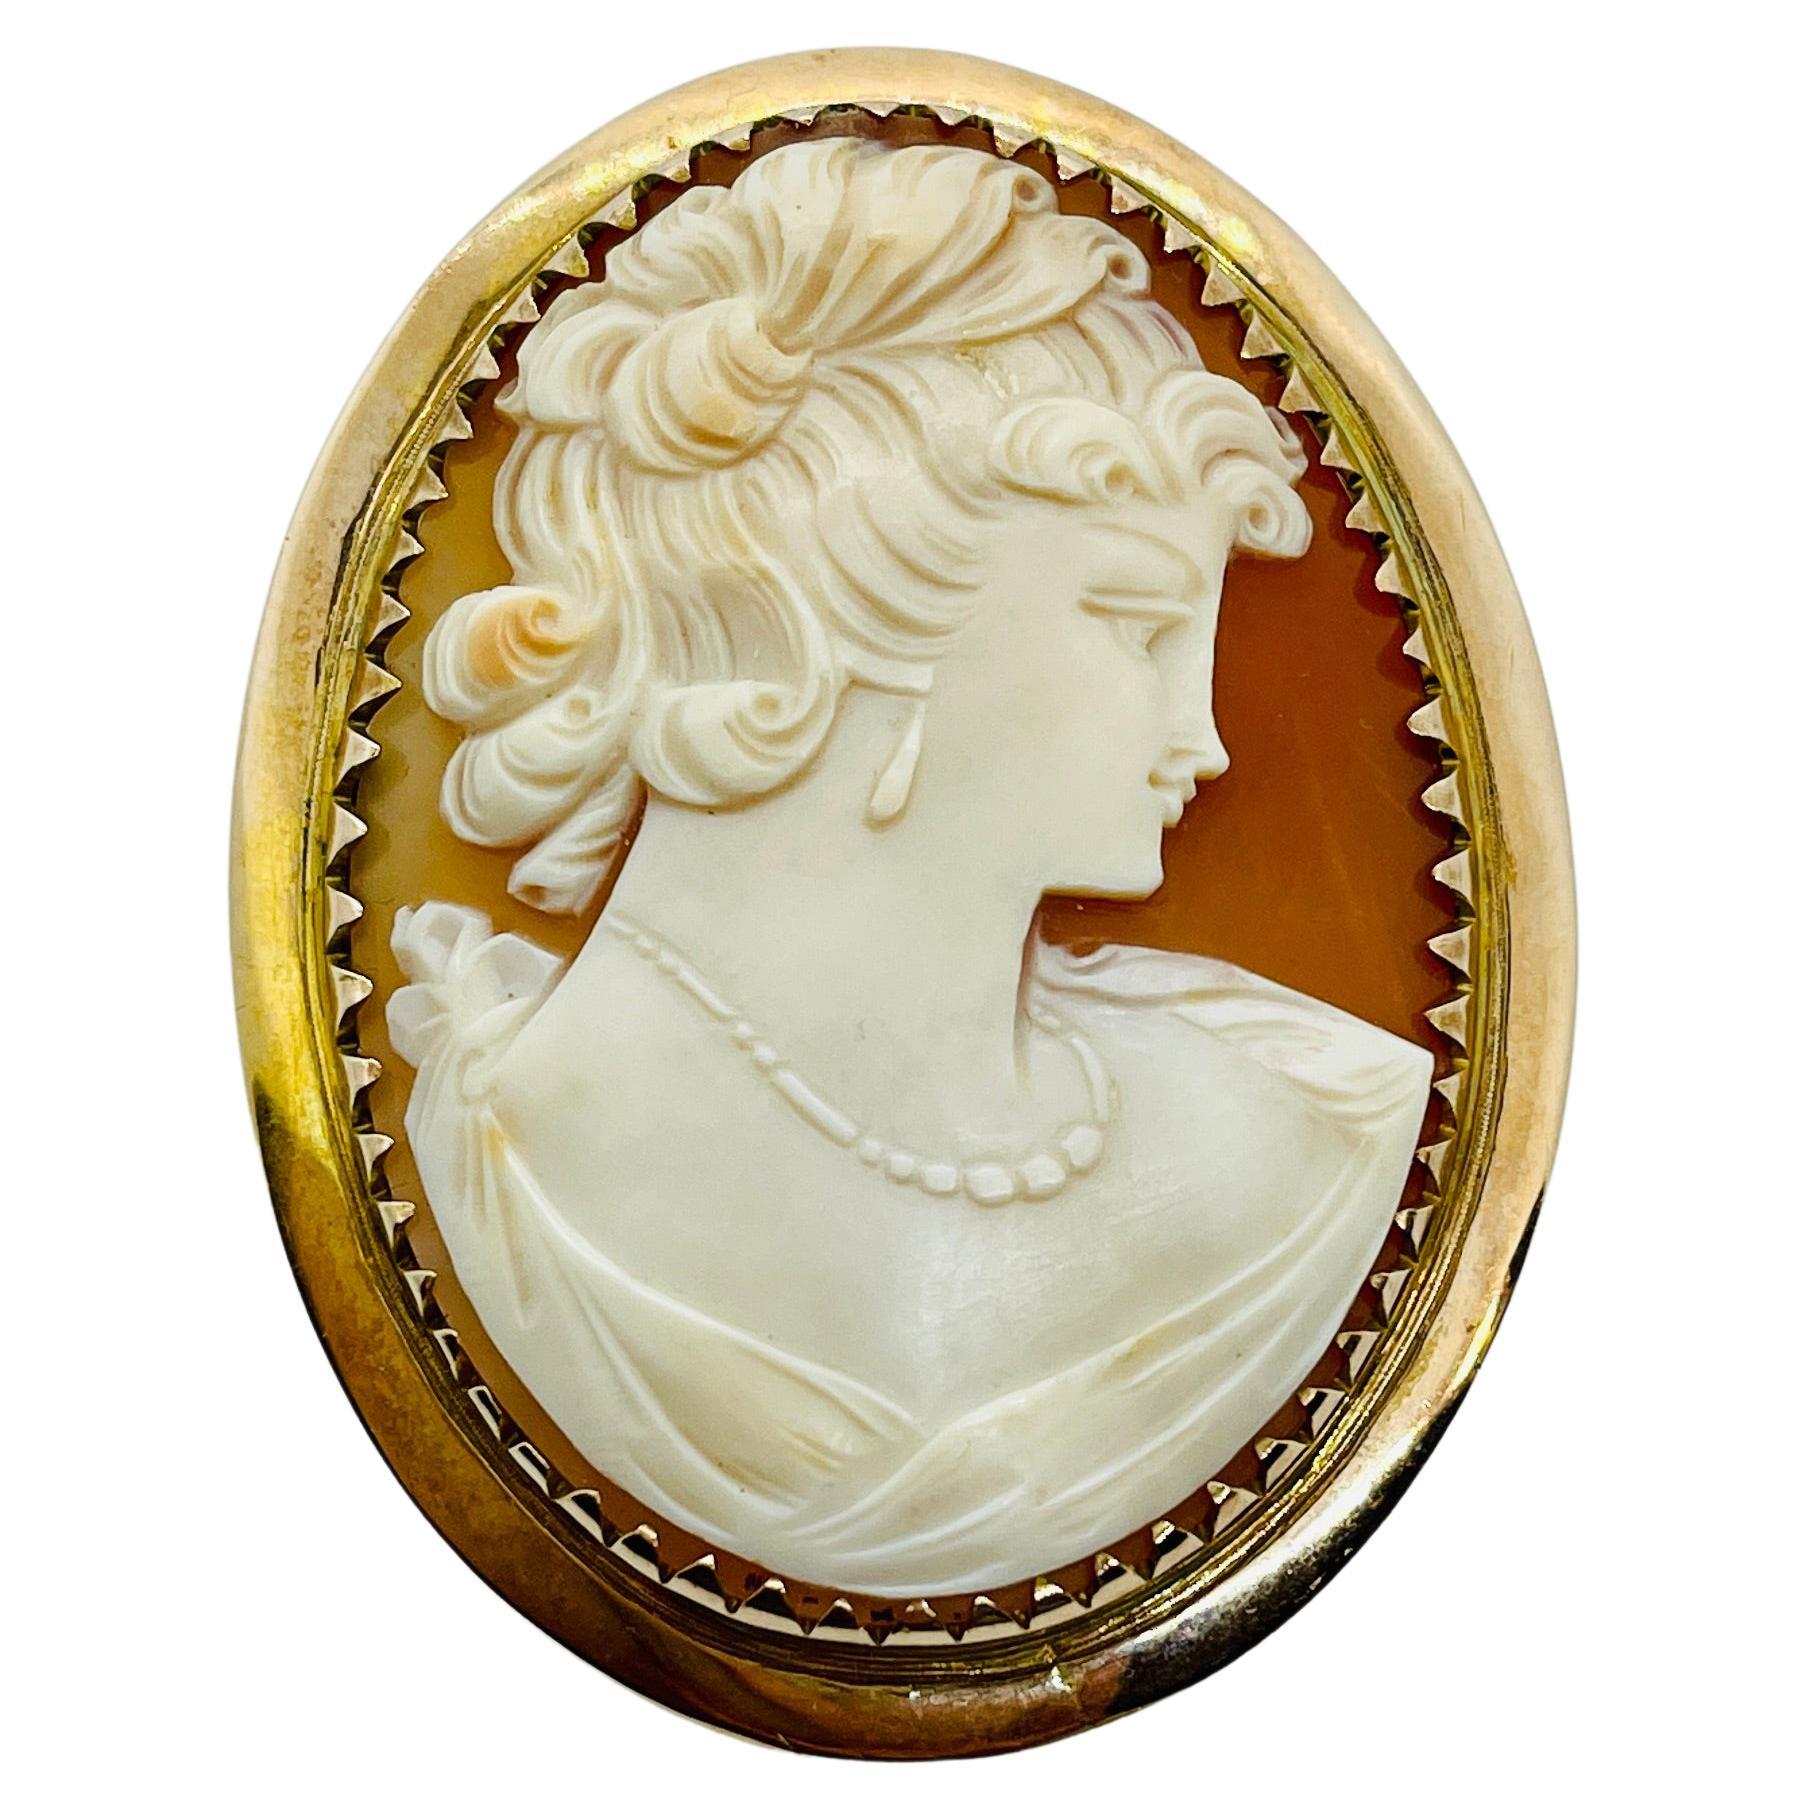 Vintage 9ct Gold Cameo Brooch NeoClassical Lady Wearing Earrings Necklace c1940s